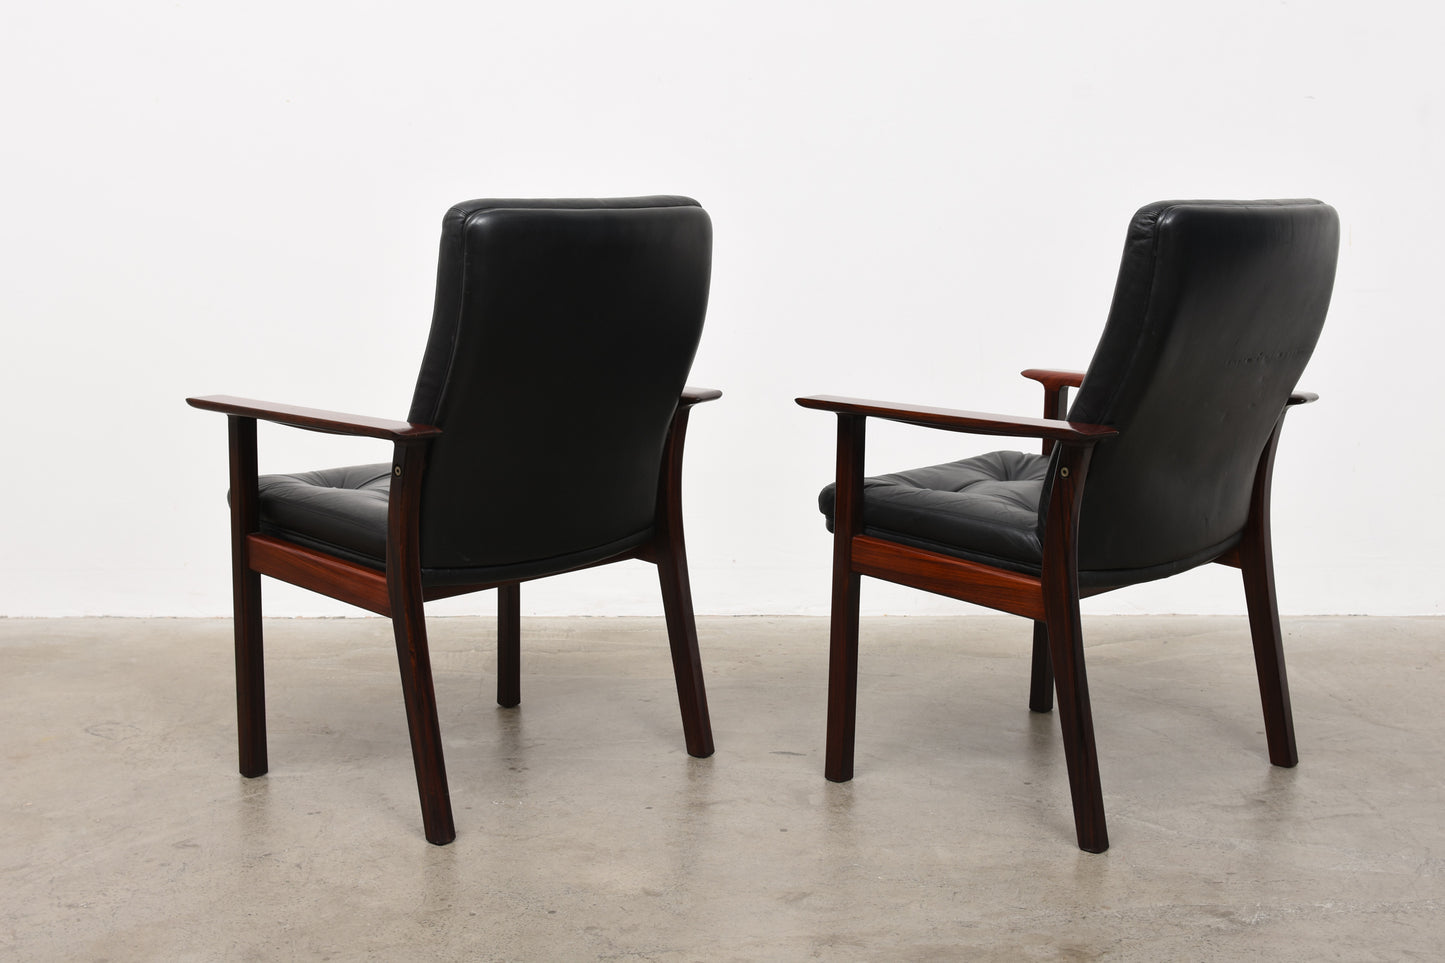 One available: Rosewood + leather armchairs by Arne Vodder